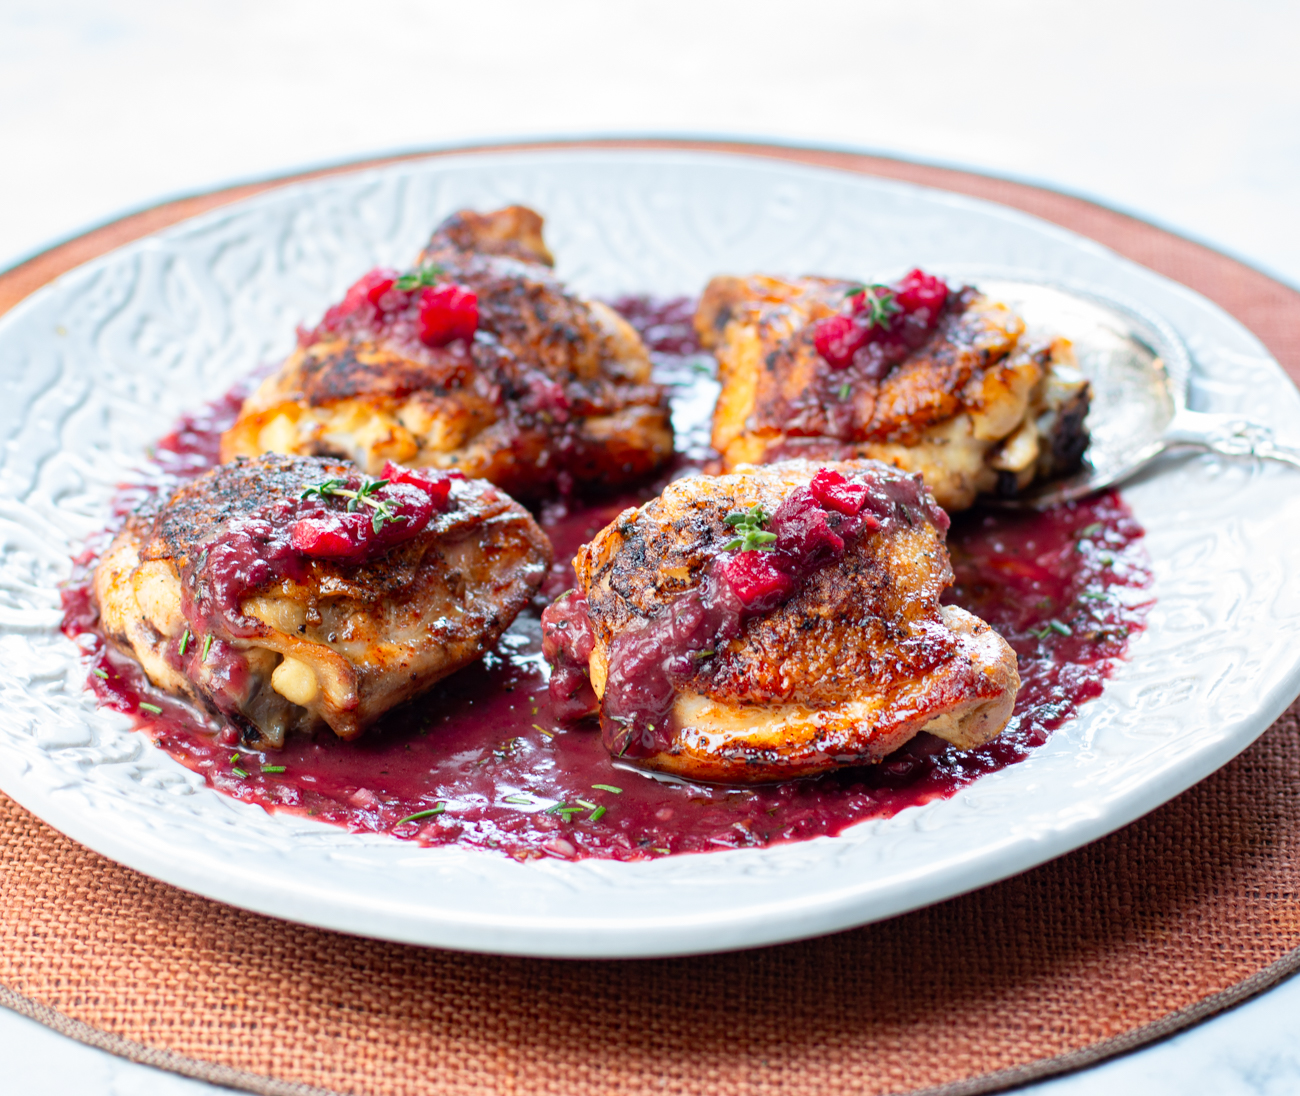 Crispy Chicken Thighs with Savory Cranberry Sauce (using your leftover cranberry sauce!)